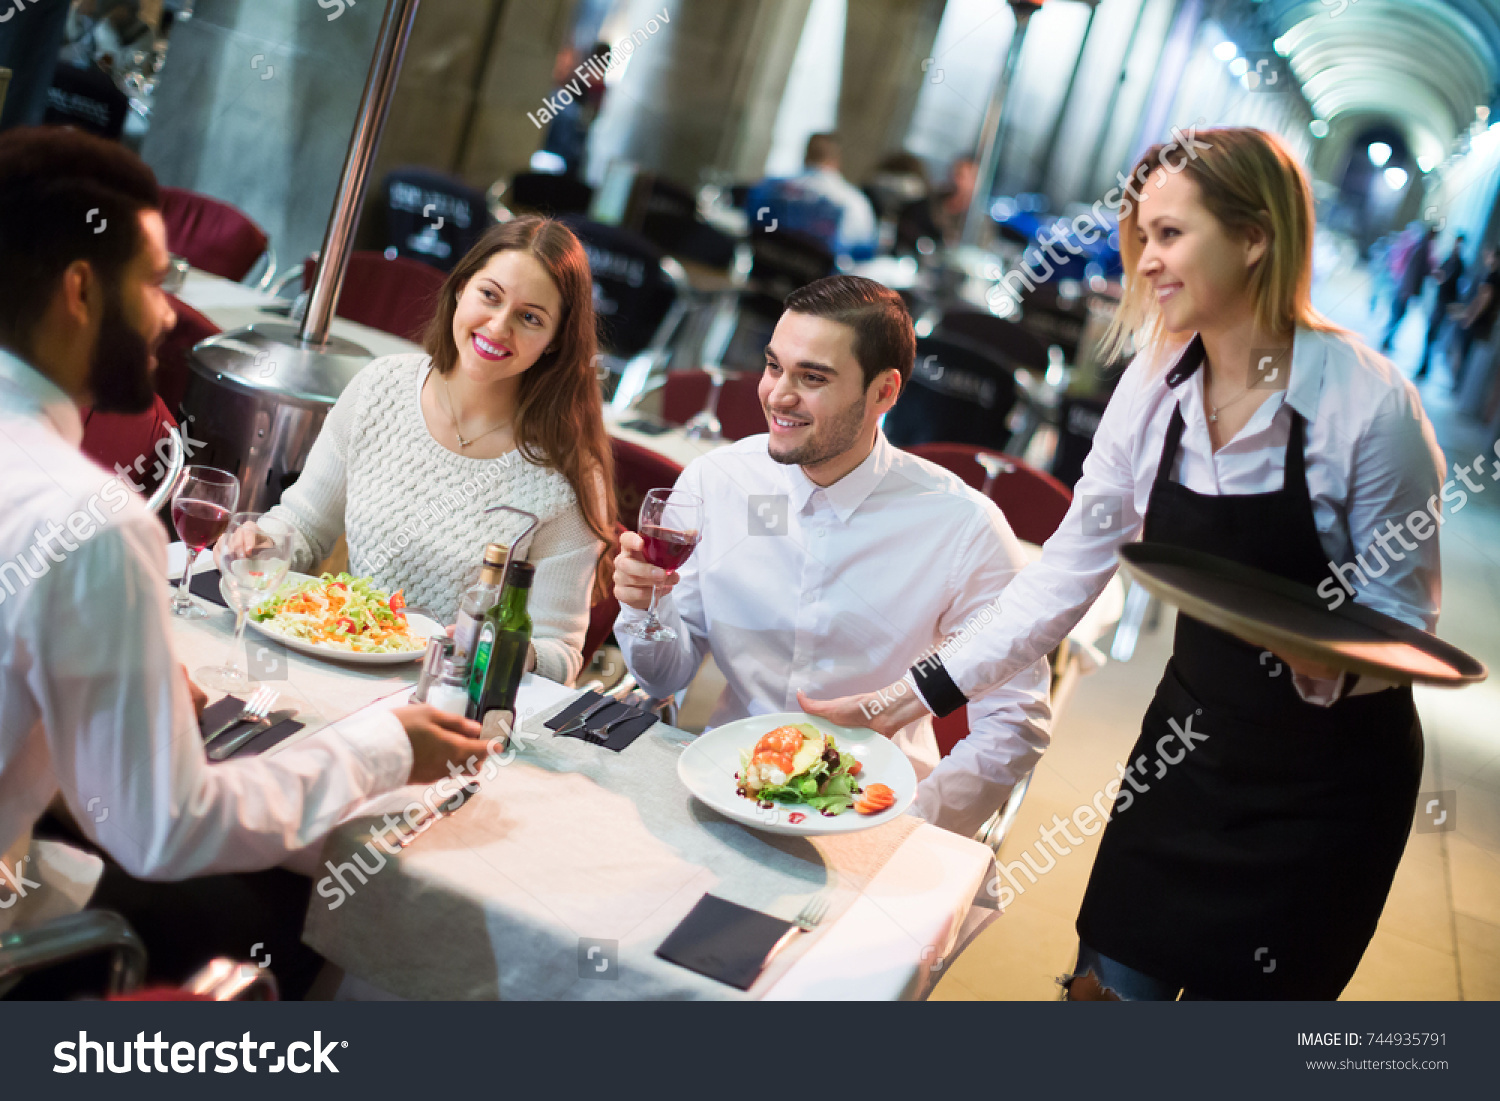 Portrait of smiling young friends in outdoors restaurant and smiling waitress #744935791